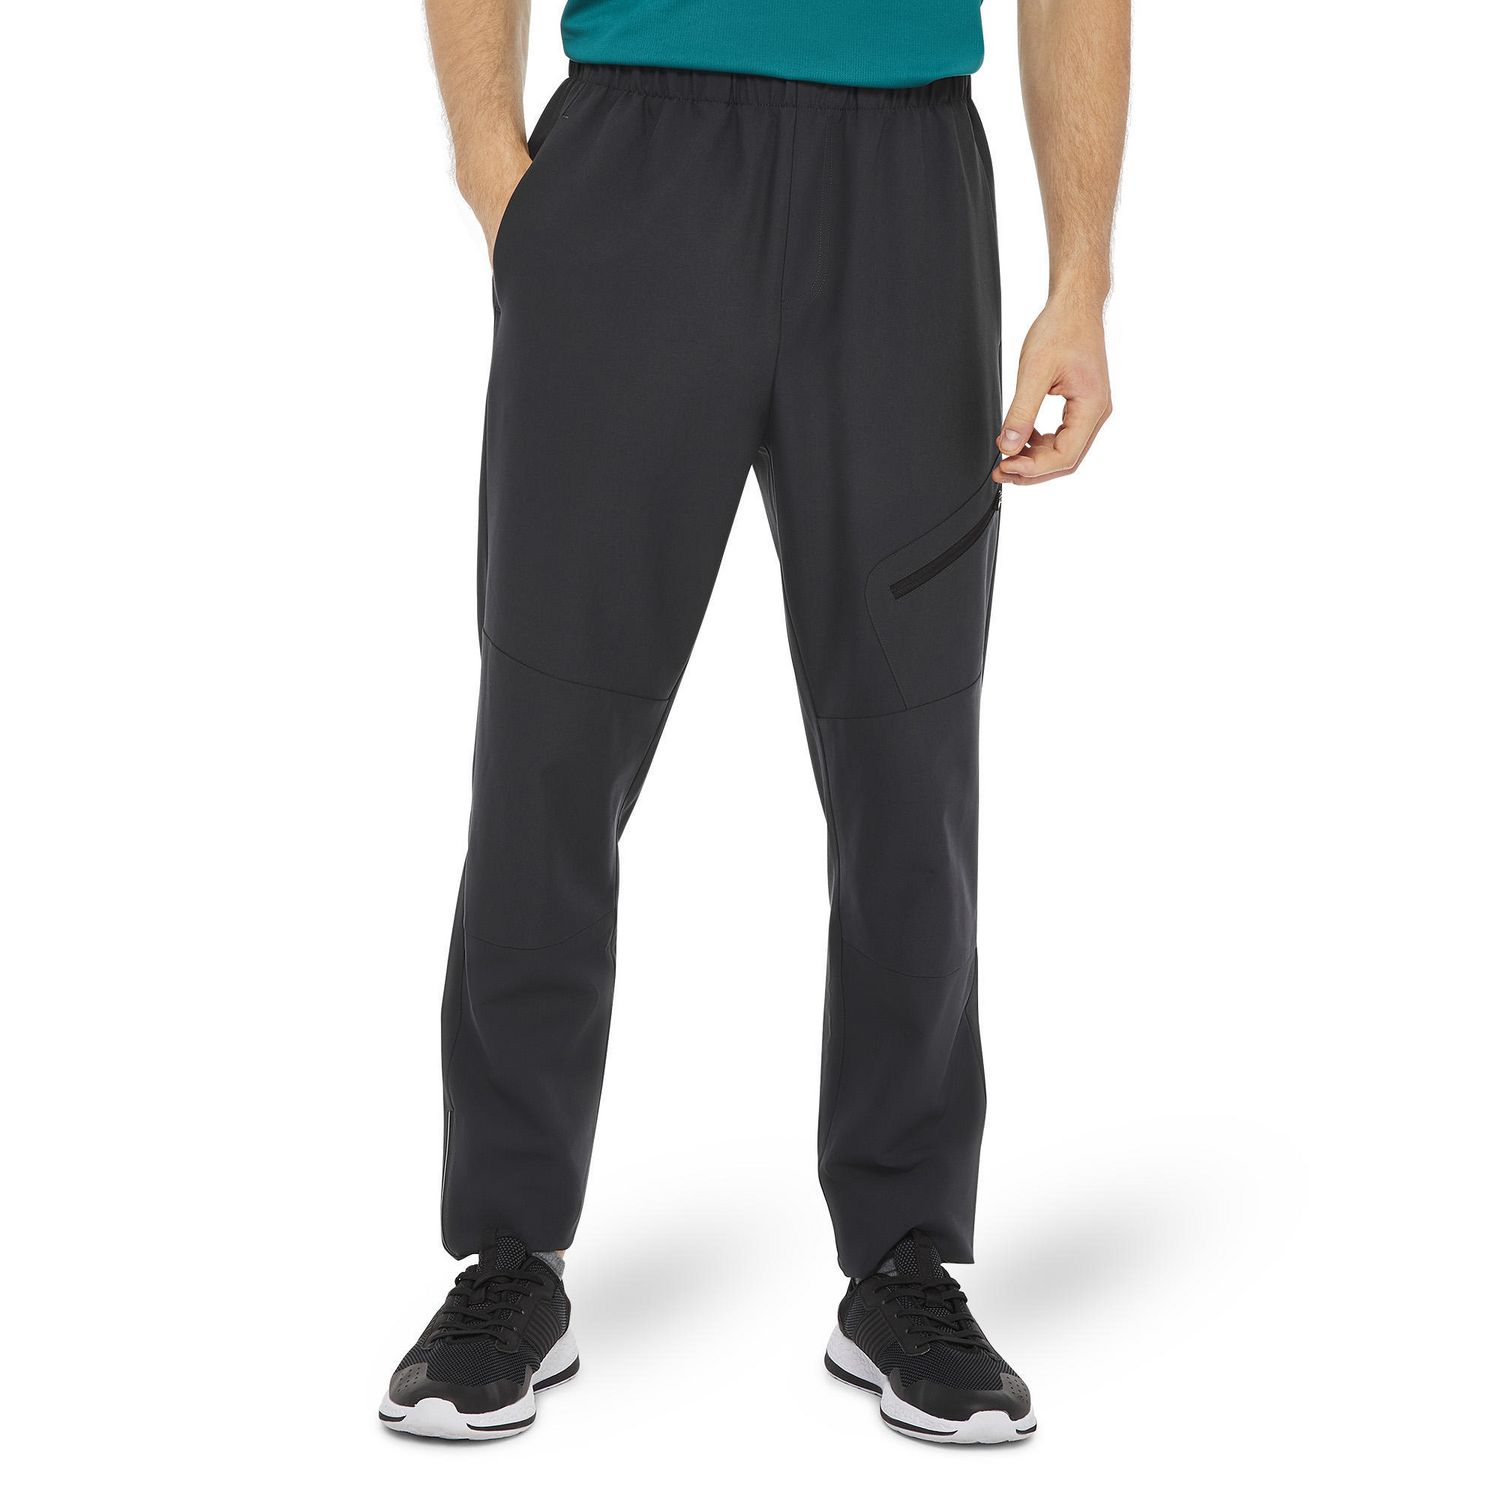 Athletic Works Men's Woven Pant | Walmart Canada